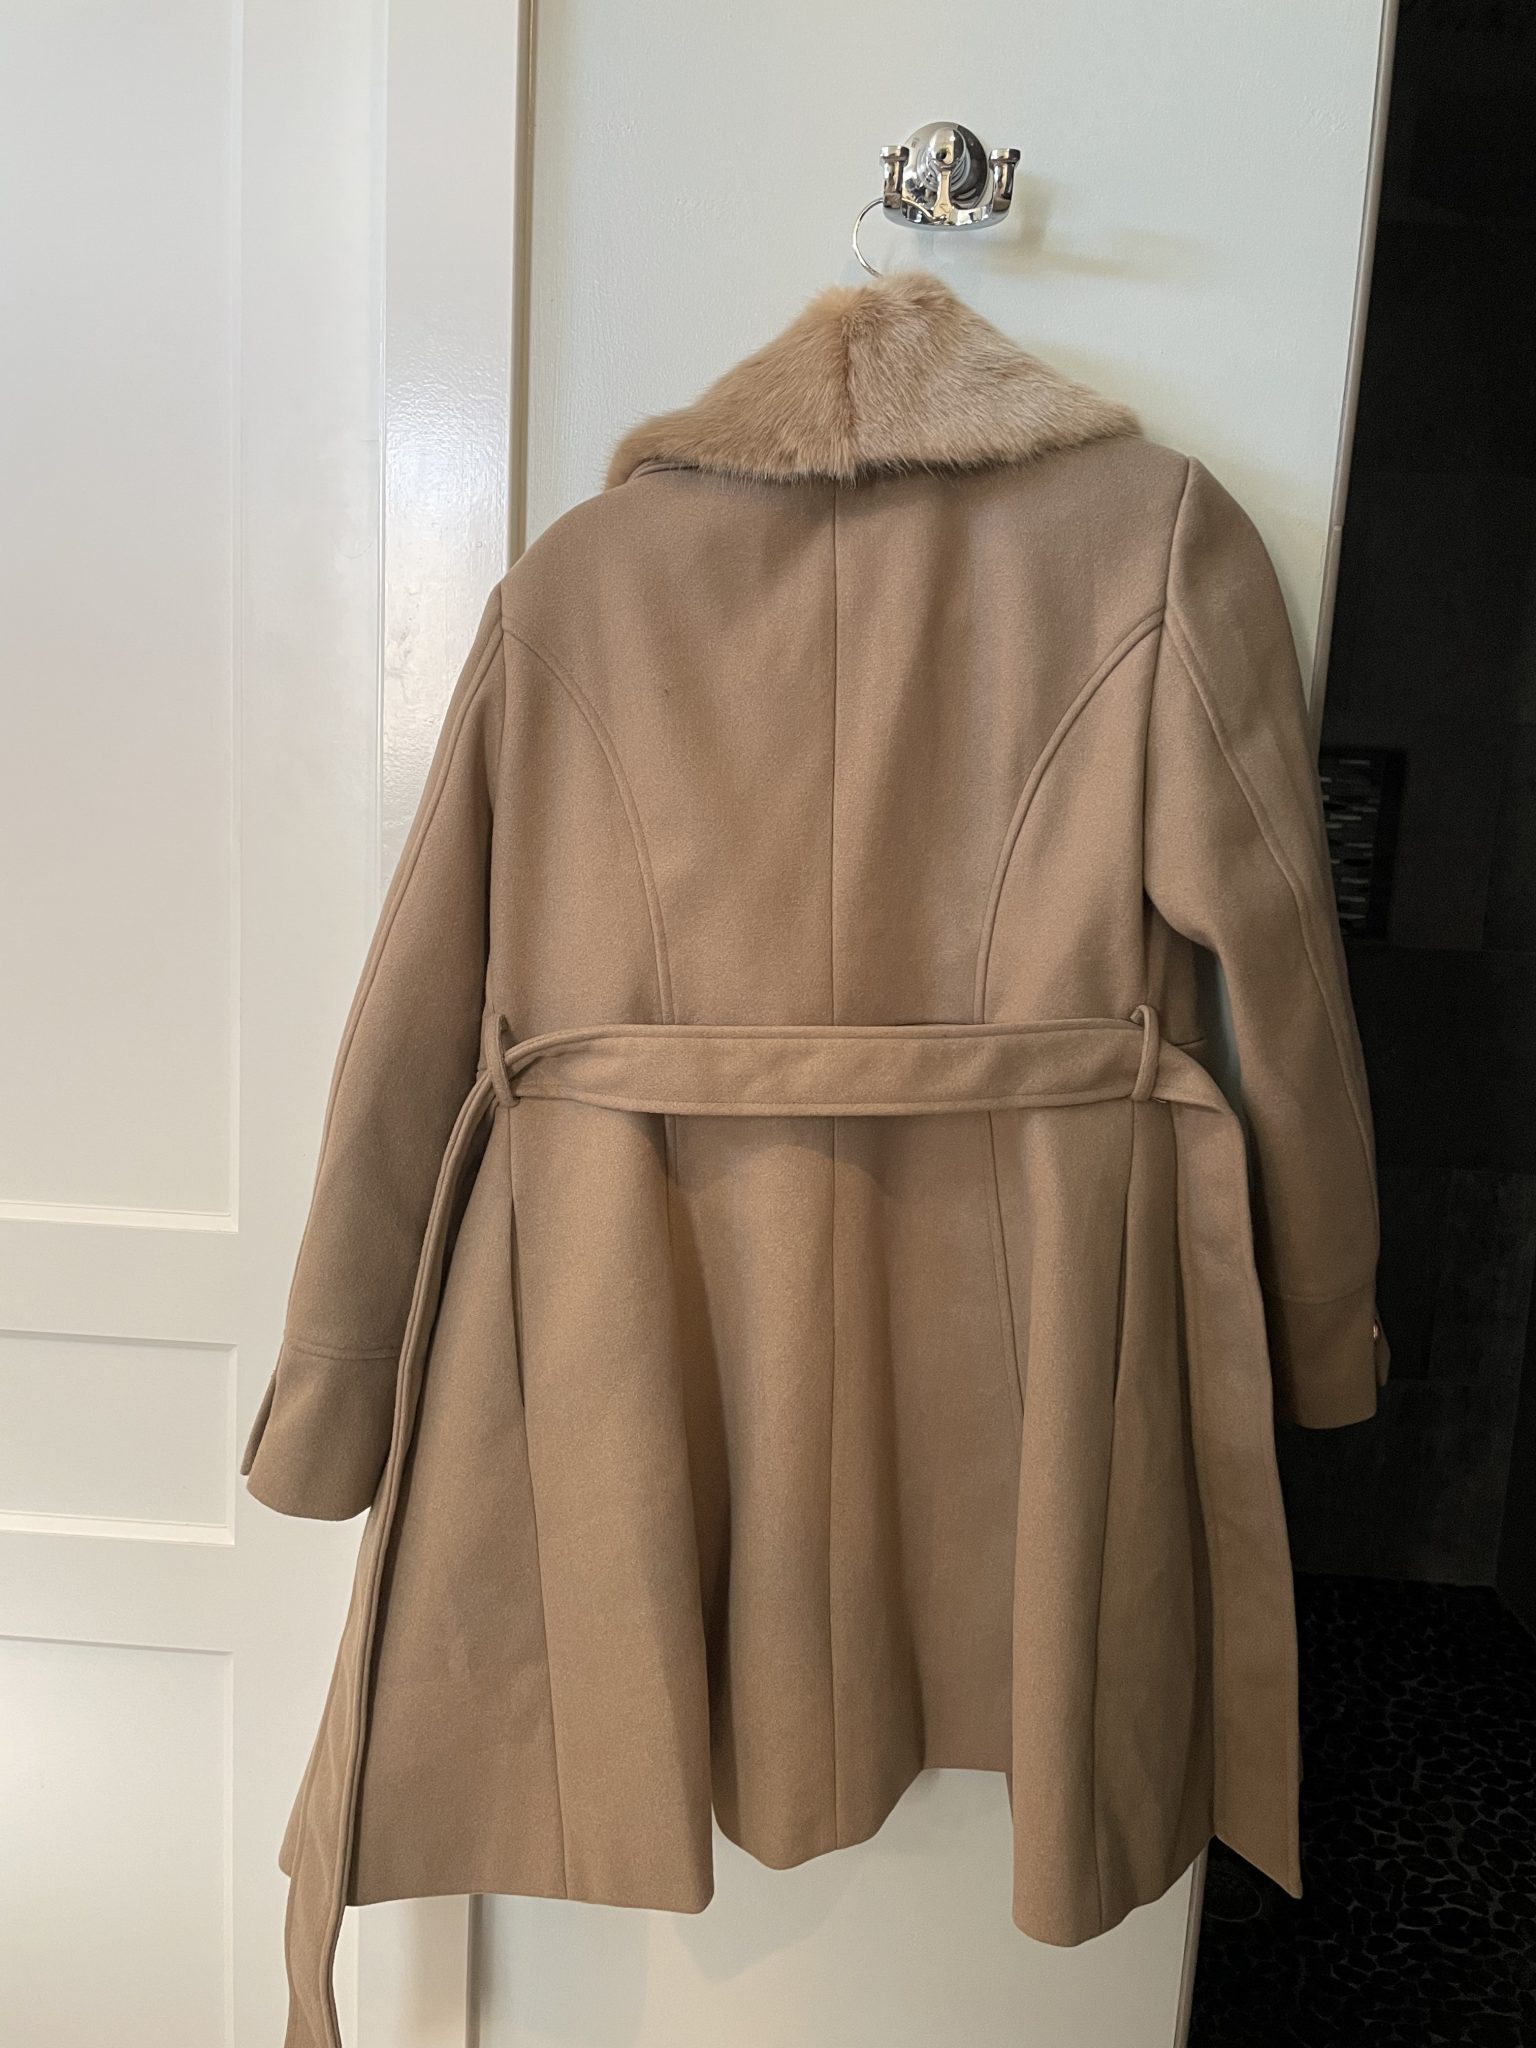 Chicwish coat review